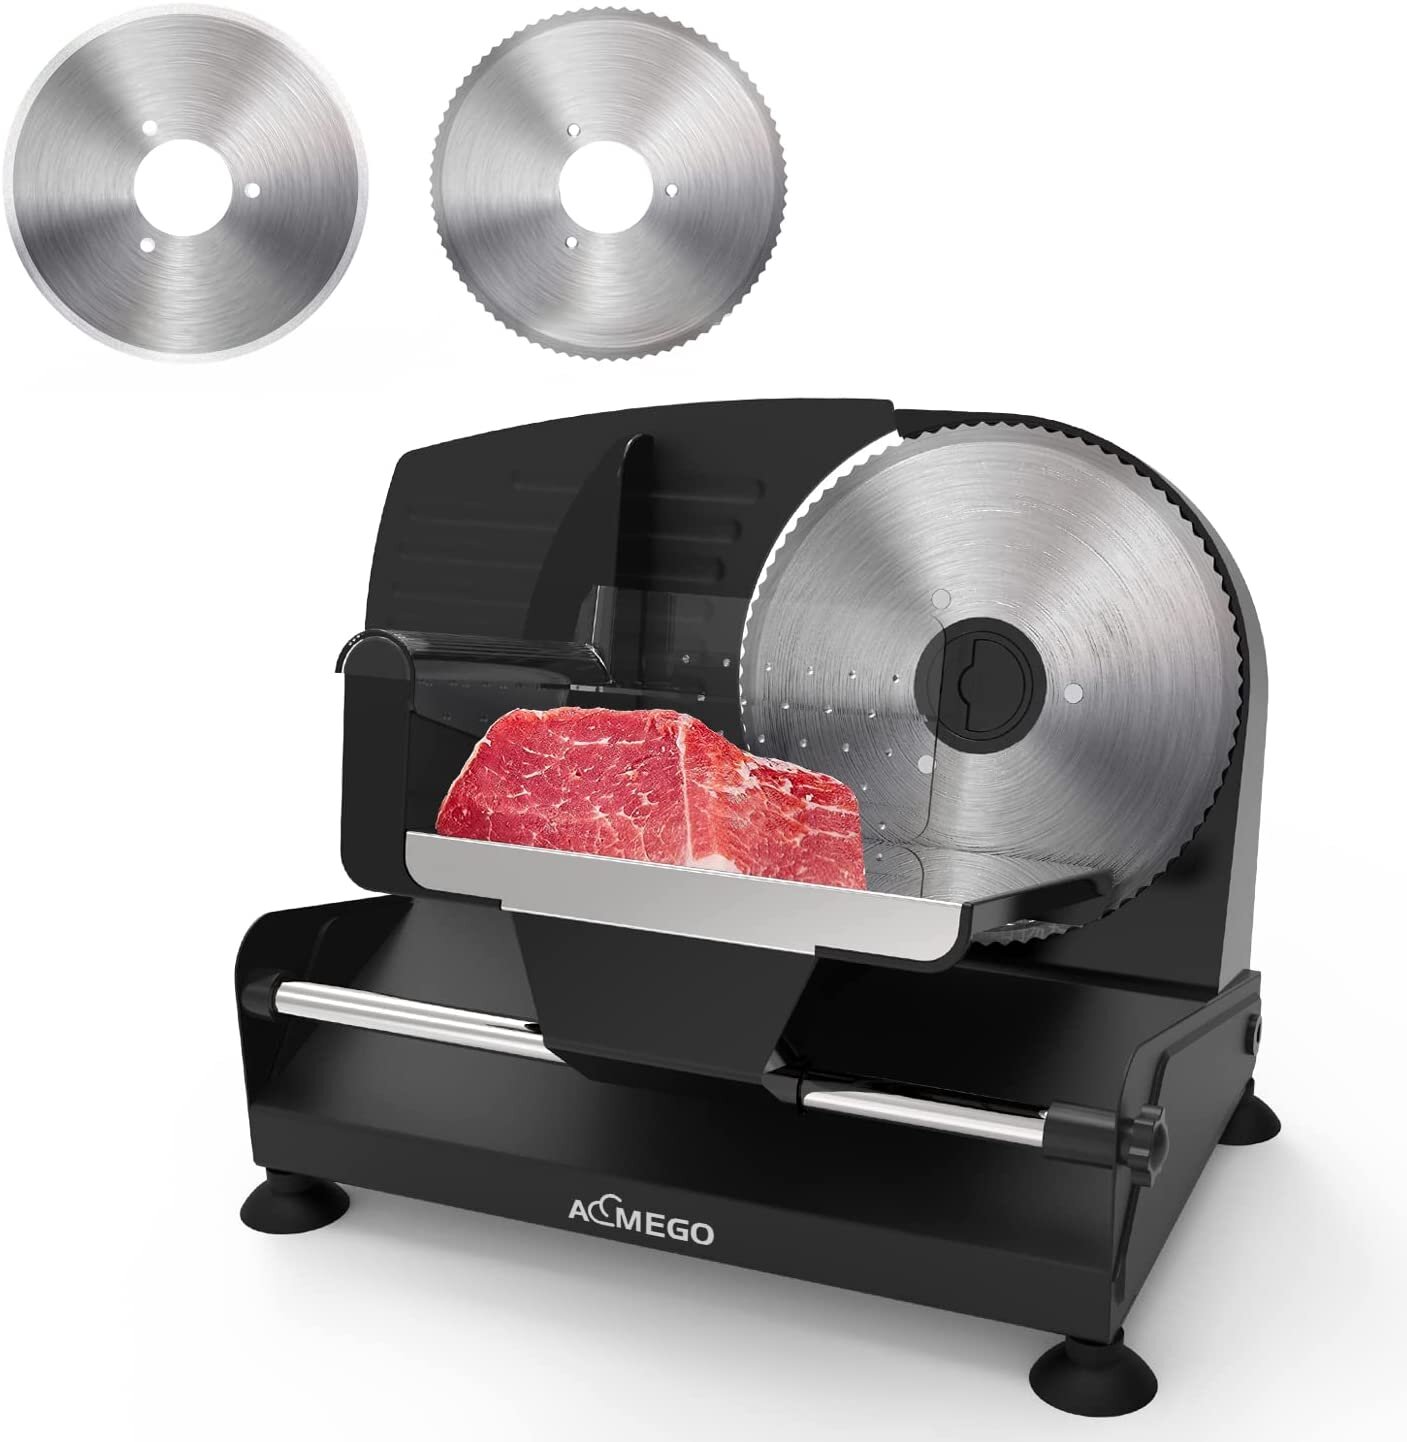 The Little Vintage Electric meat slicer for home use - TOMAGA Chromatic